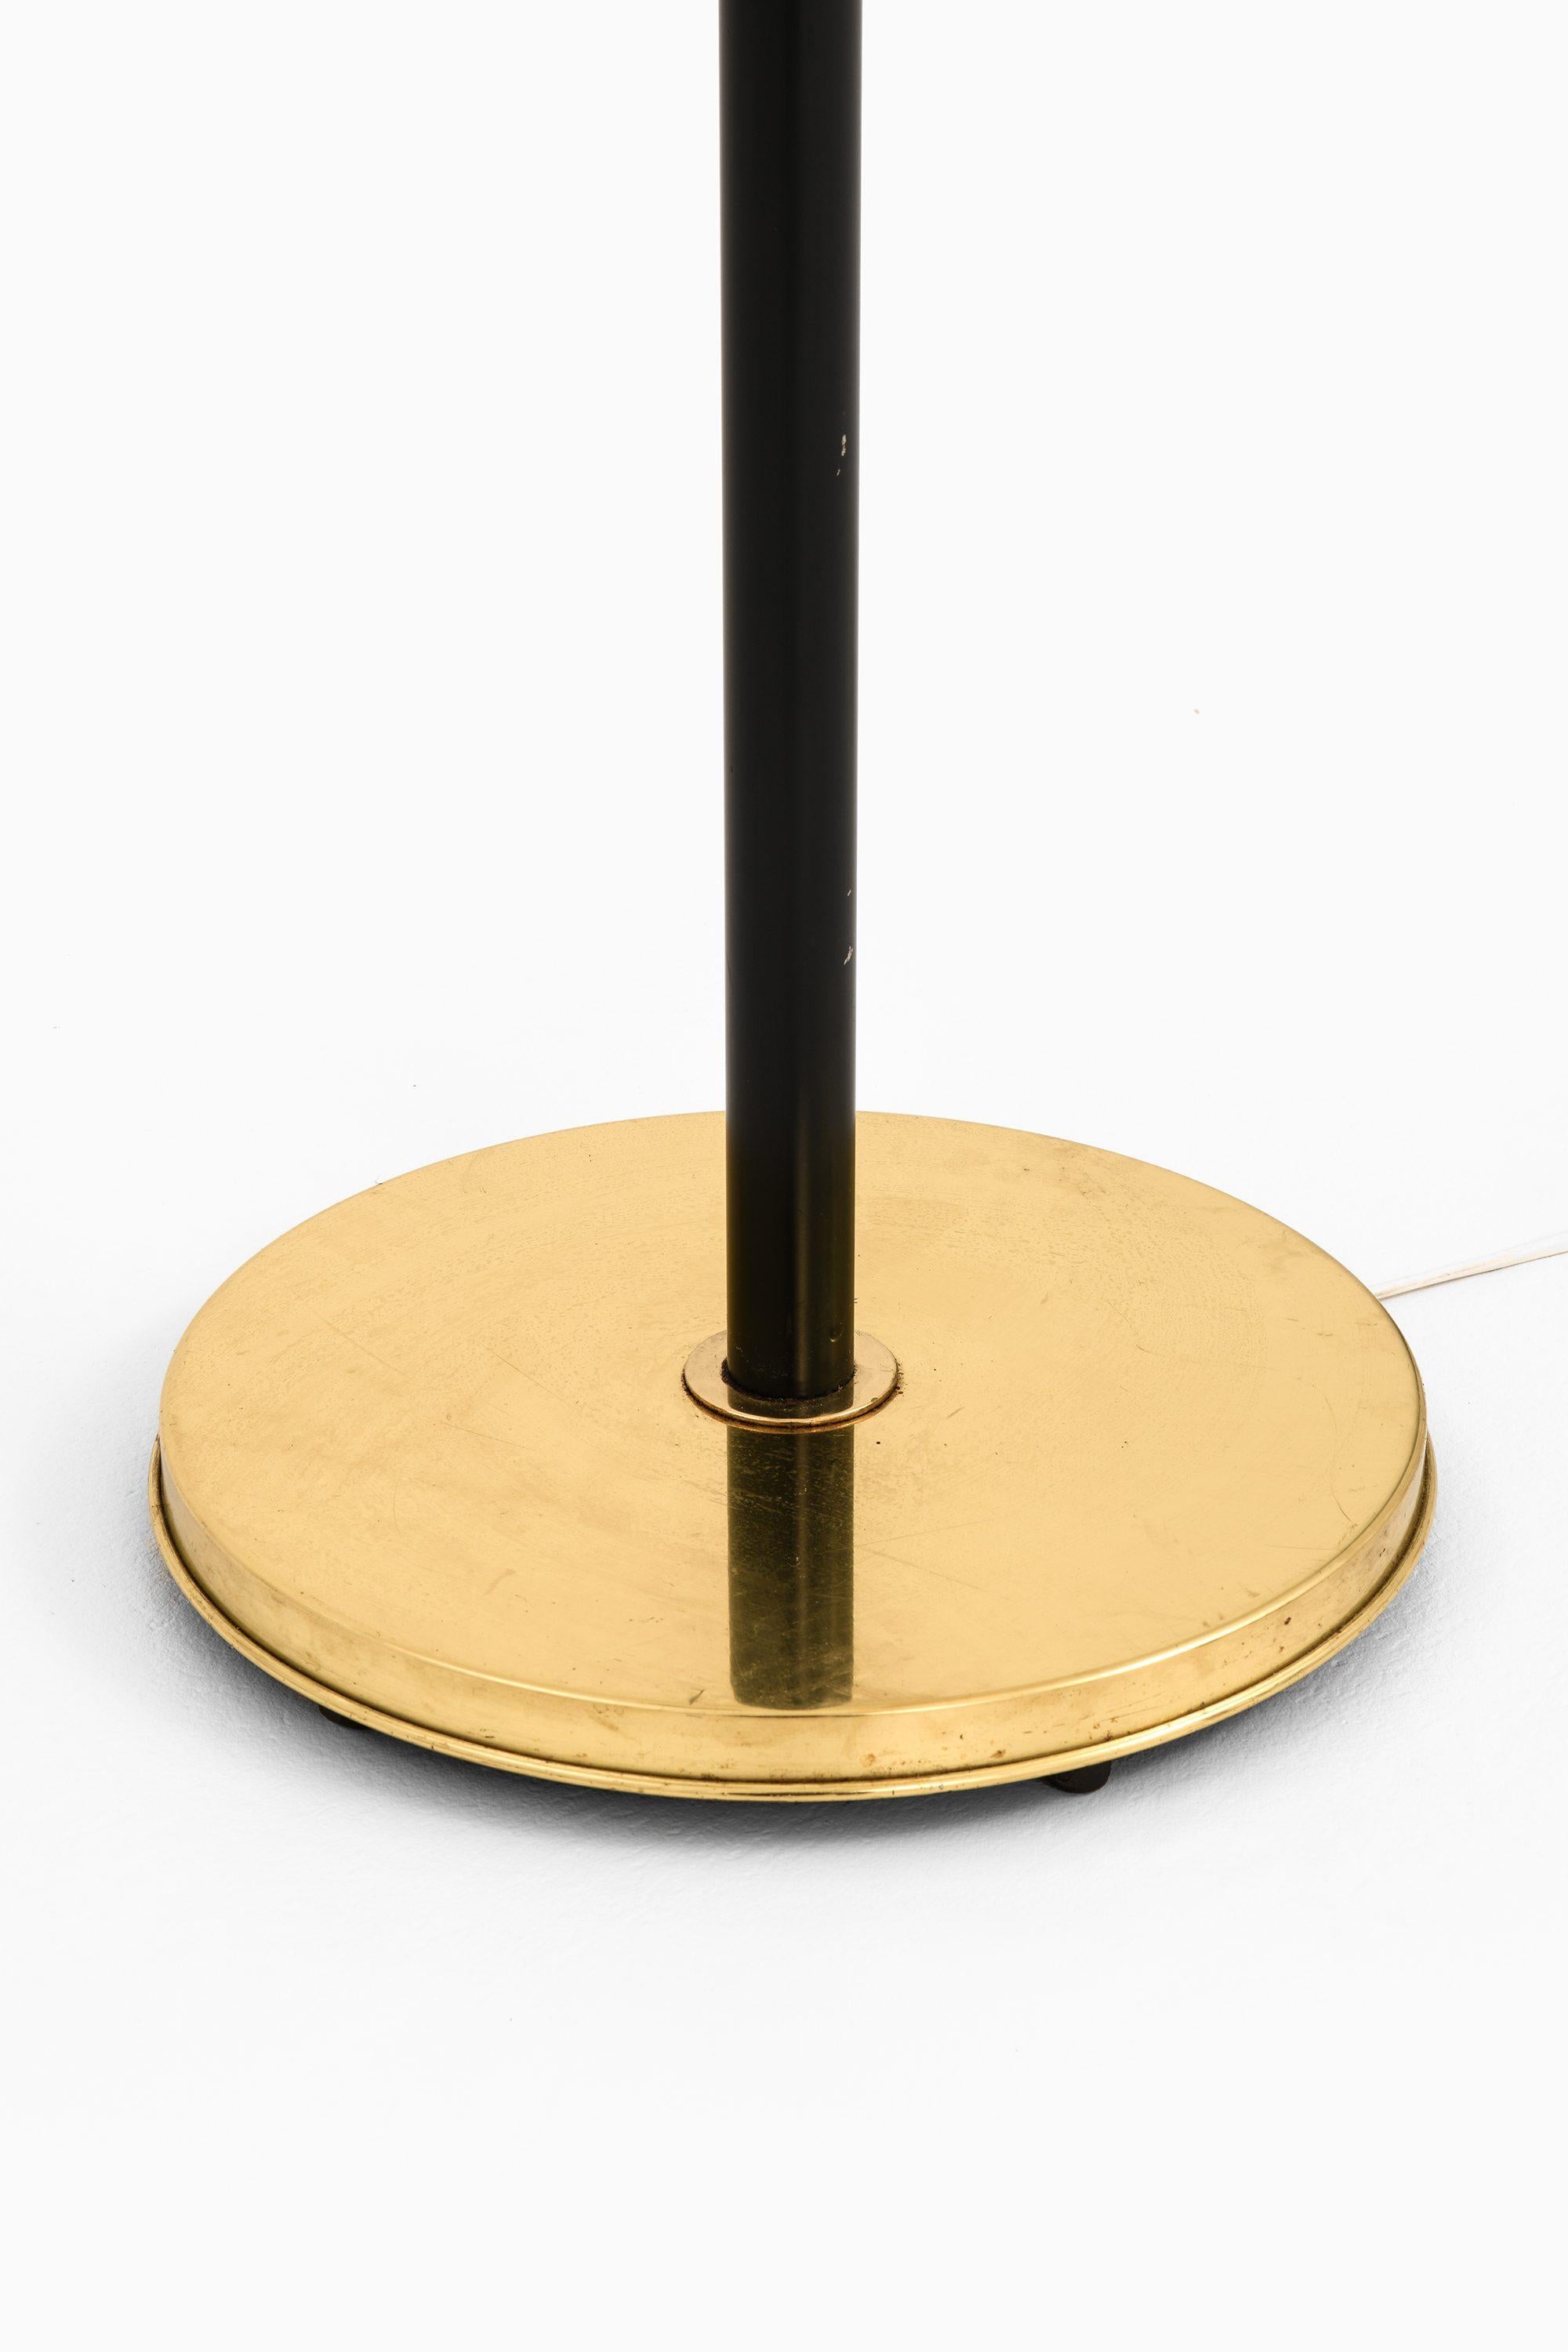 Floor Lamp in Brass, Black Metal and Original Shades by Josef Frank, 1938 In Good Condition For Sale In Limhamn, Skåne län